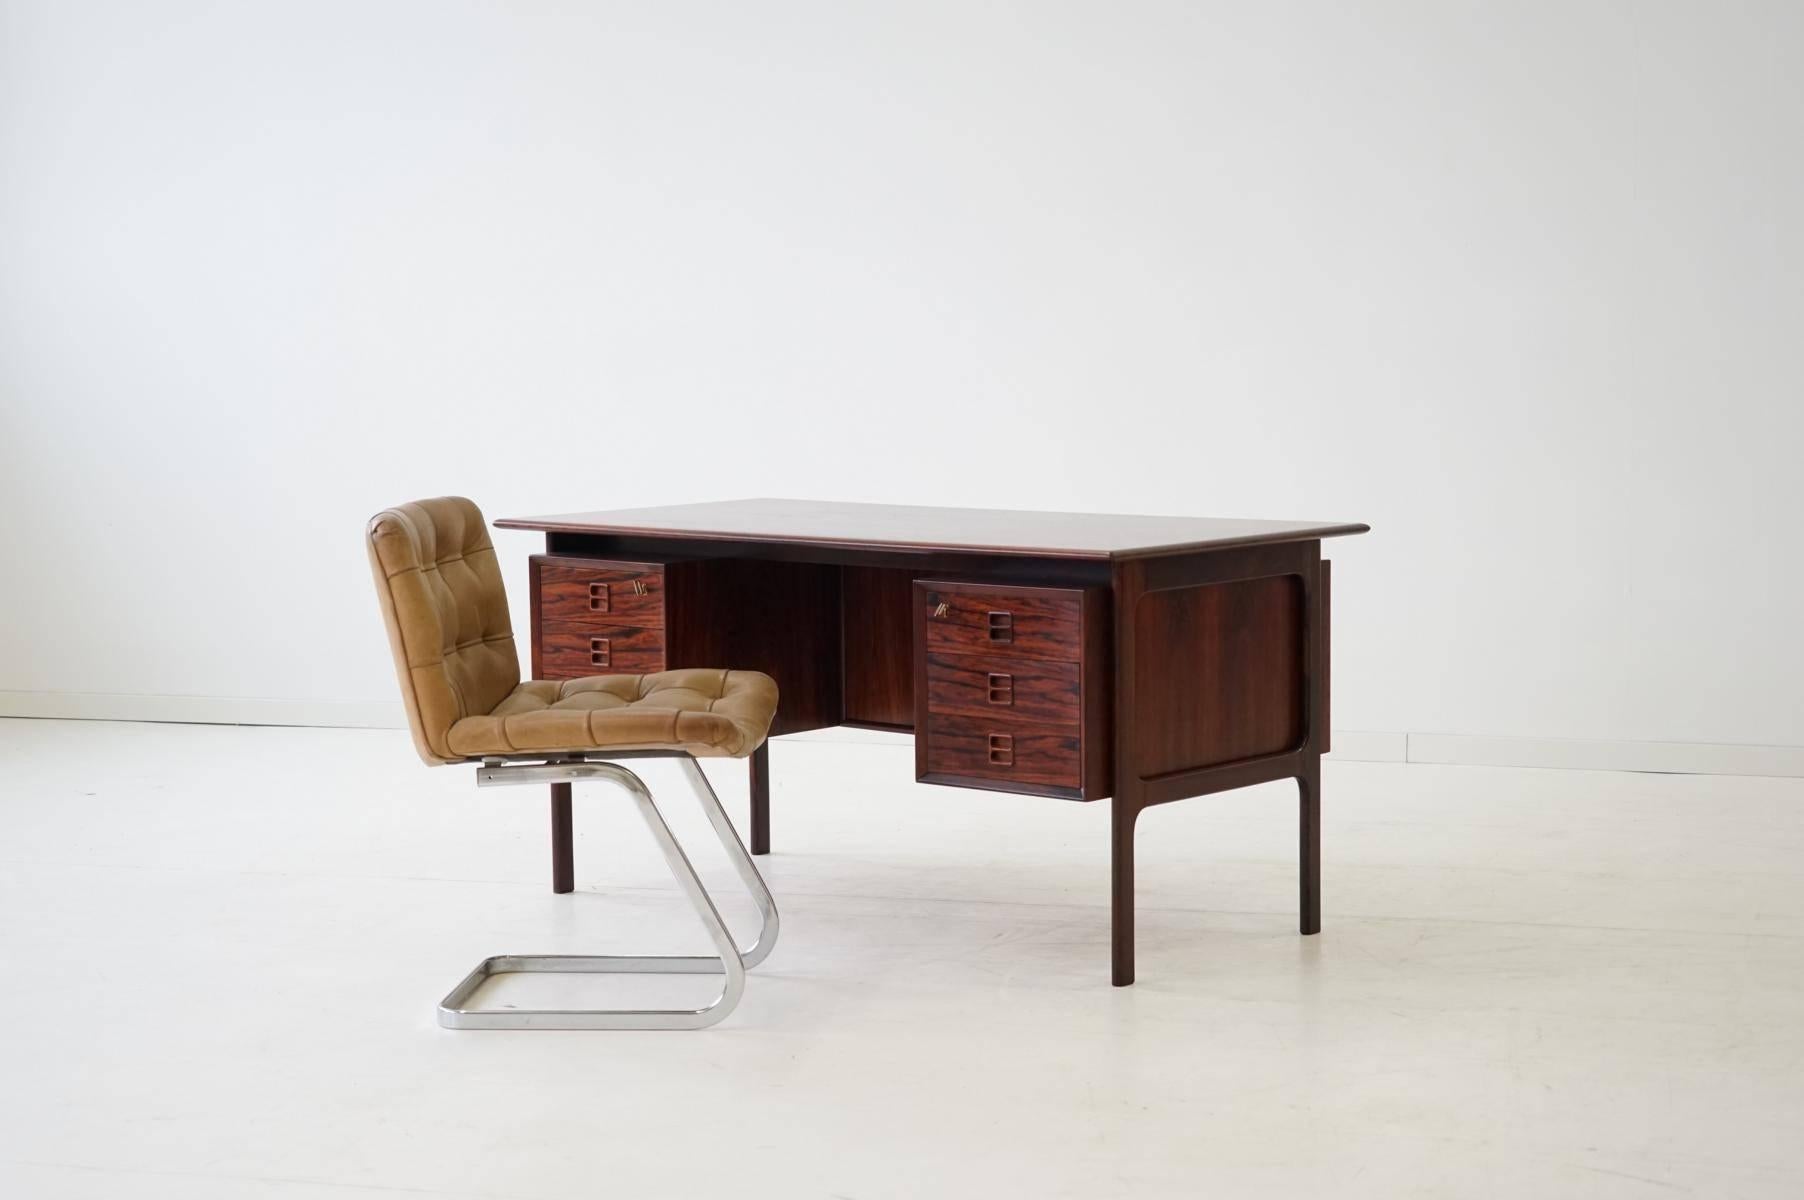 Arne Vodder for Sibast Palisander desk
This midcentury desk is very handy. Lockable drawers on the front and shelves on the back of the desk, give space for documents, books etc. 
Excellent workmanship and with very nice grip.